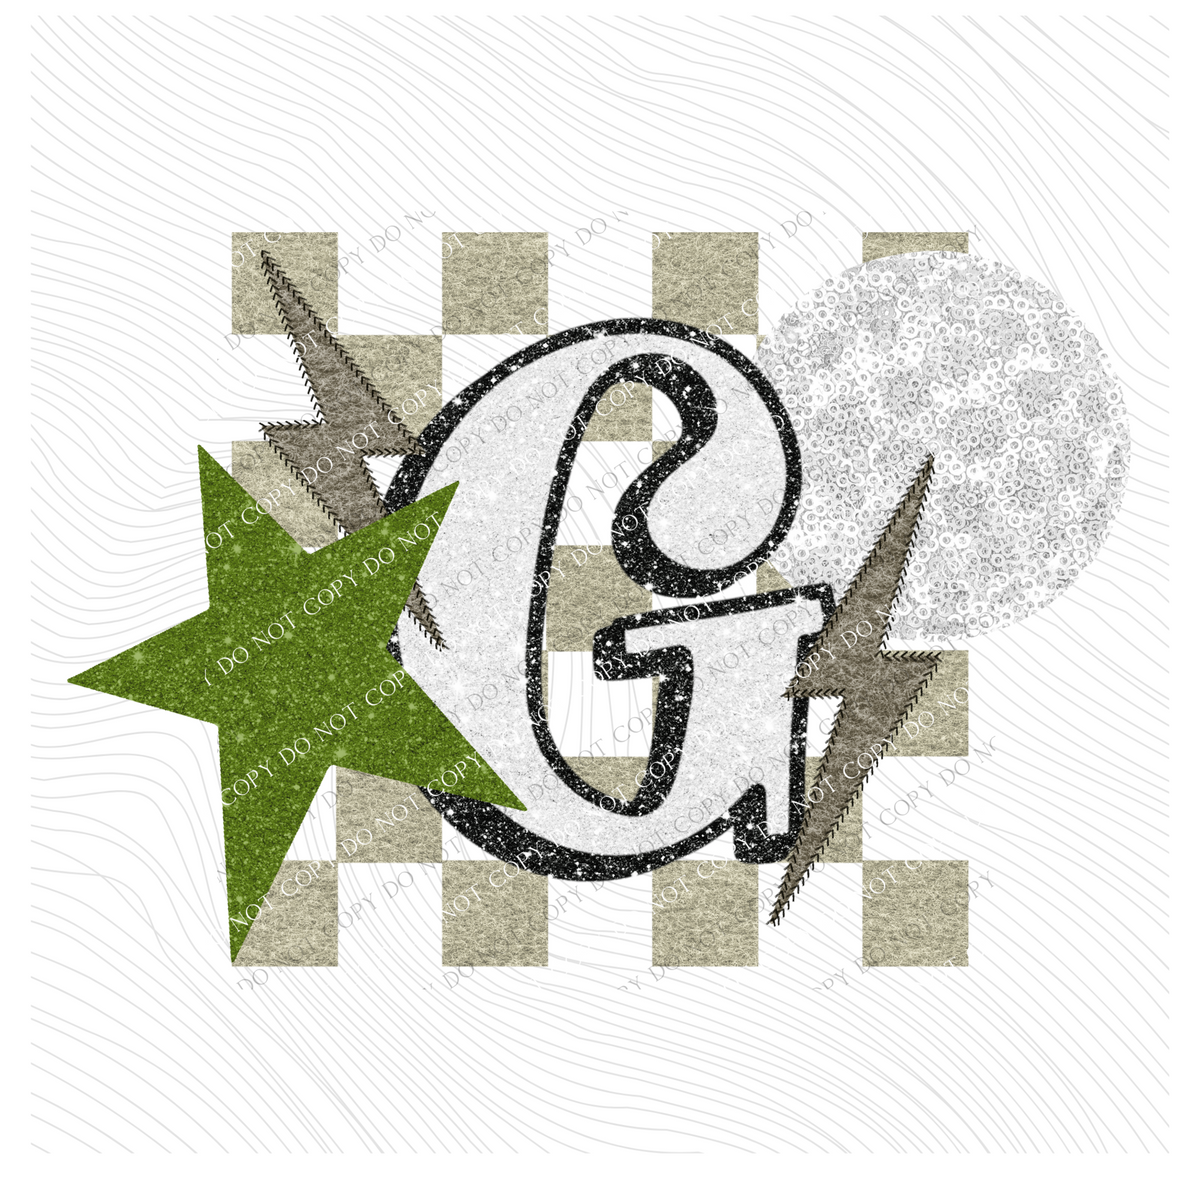 Golf Checkered Glitter Star & Stitched Bolt with Sequin Ball in Tan, Green & White Digital Design, PNG